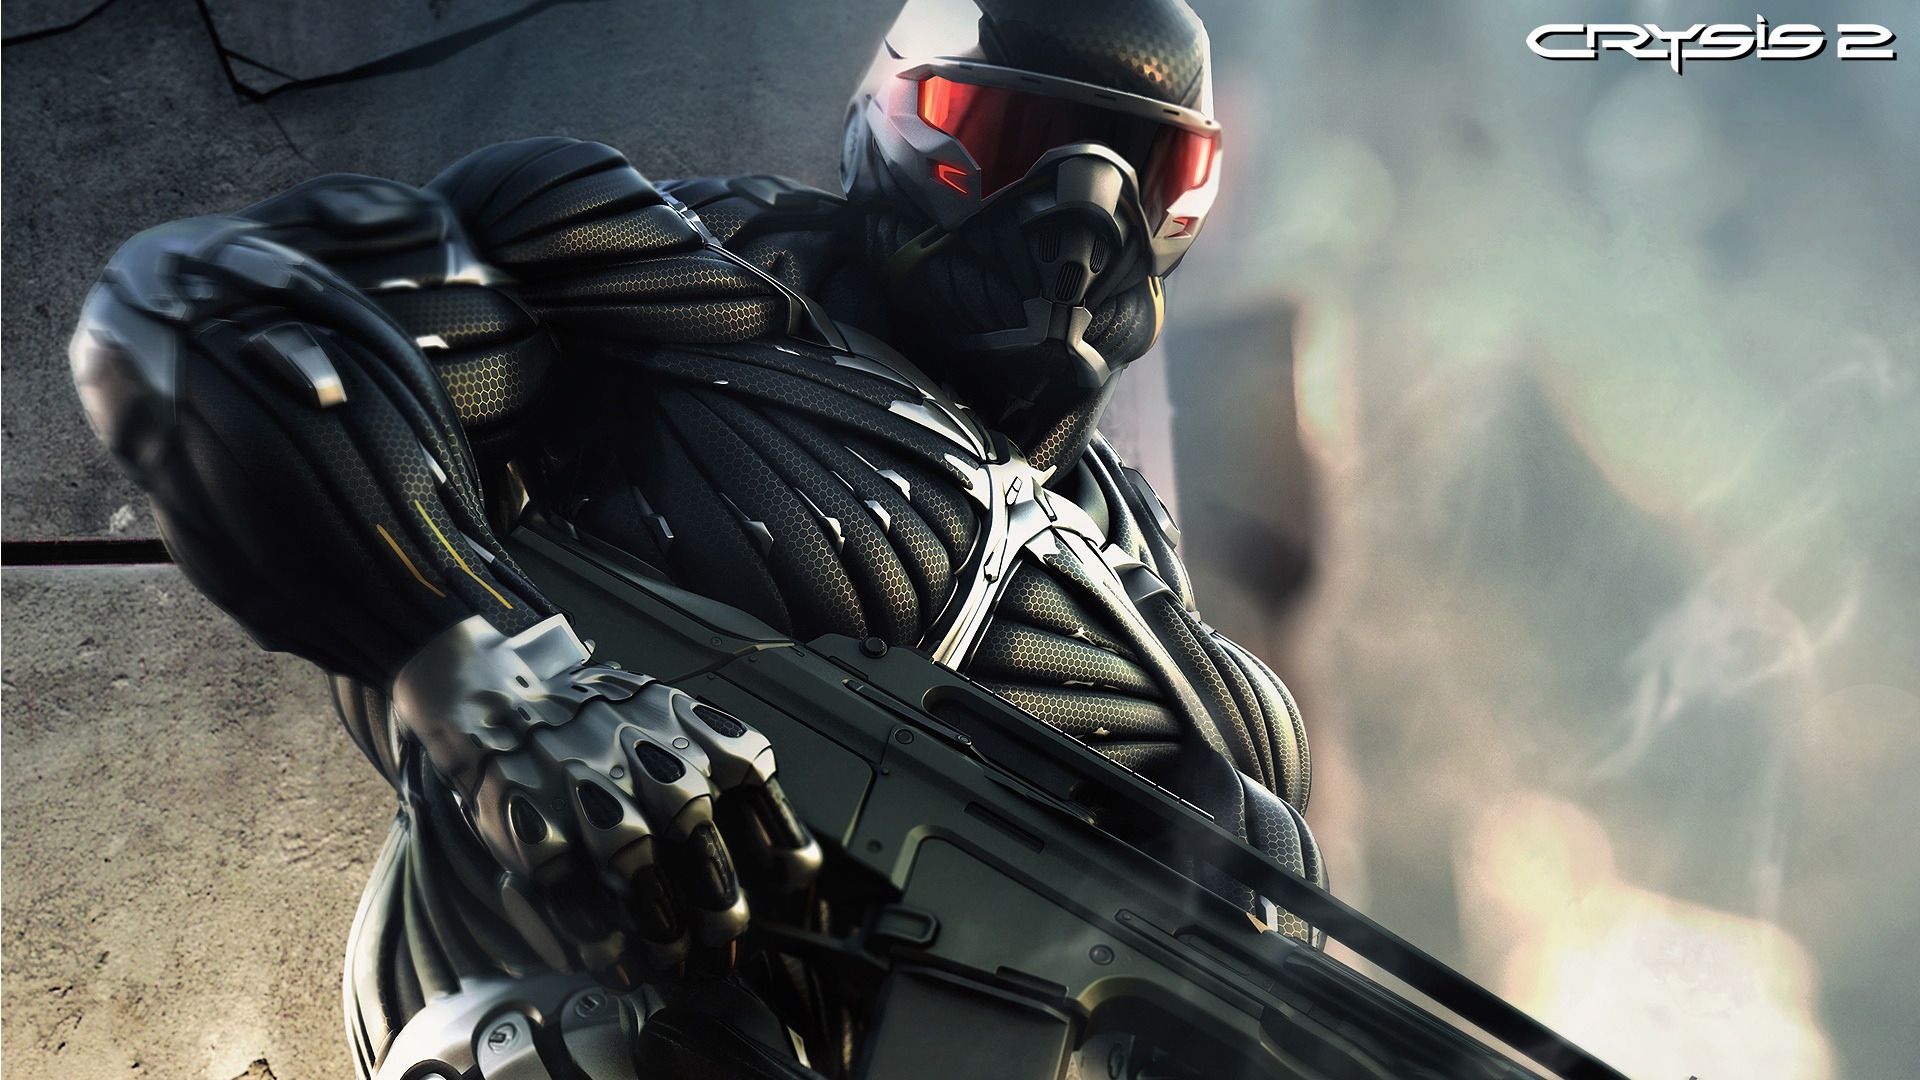 Crysis 2 Game for 1920 x 1080 HDTV 1080p resolution